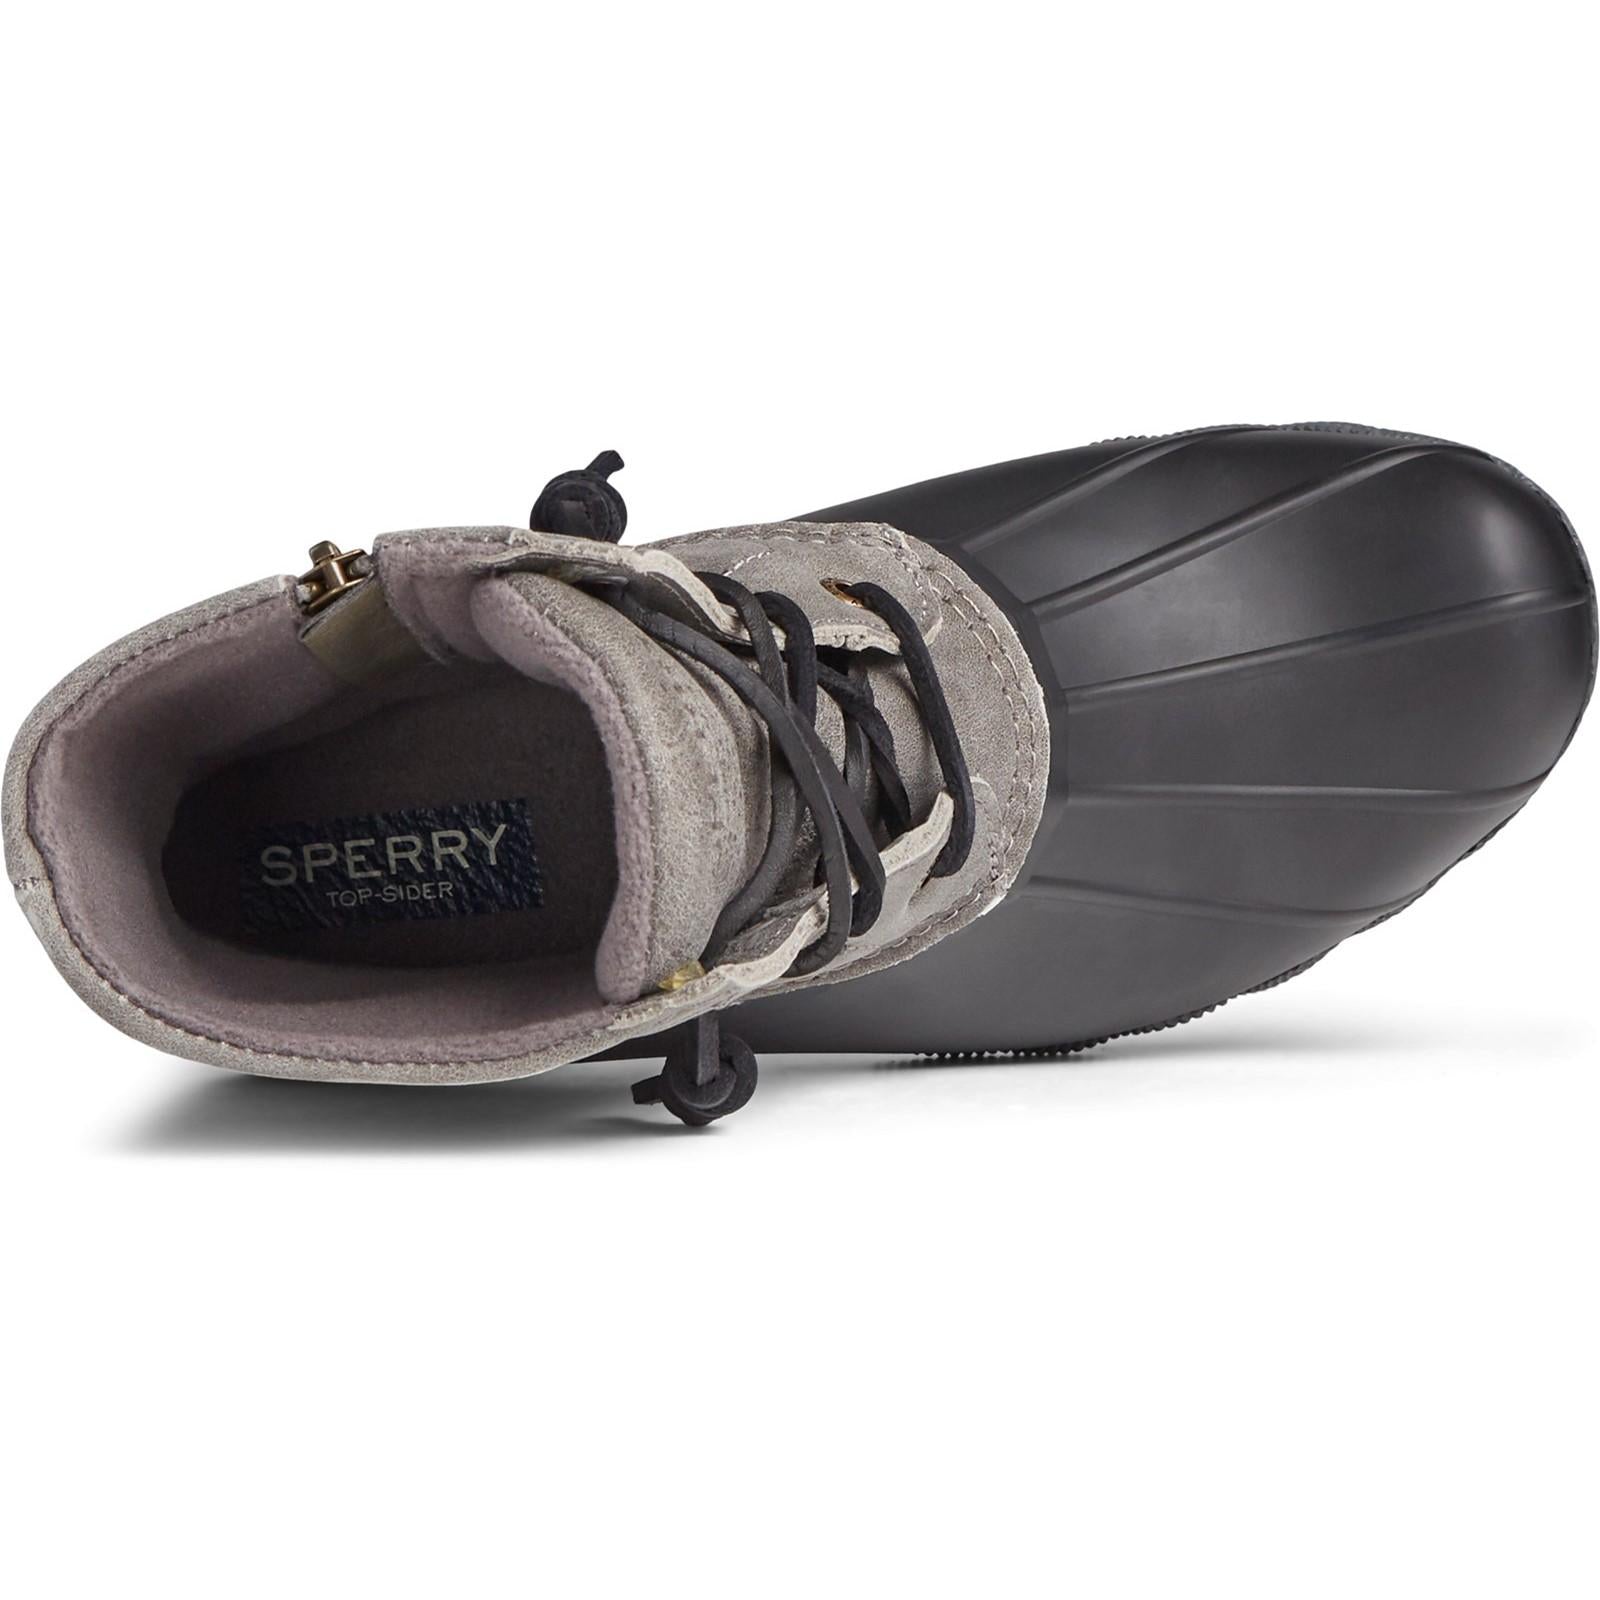 Sperry Top-sider Saltwater Core Mid Boot